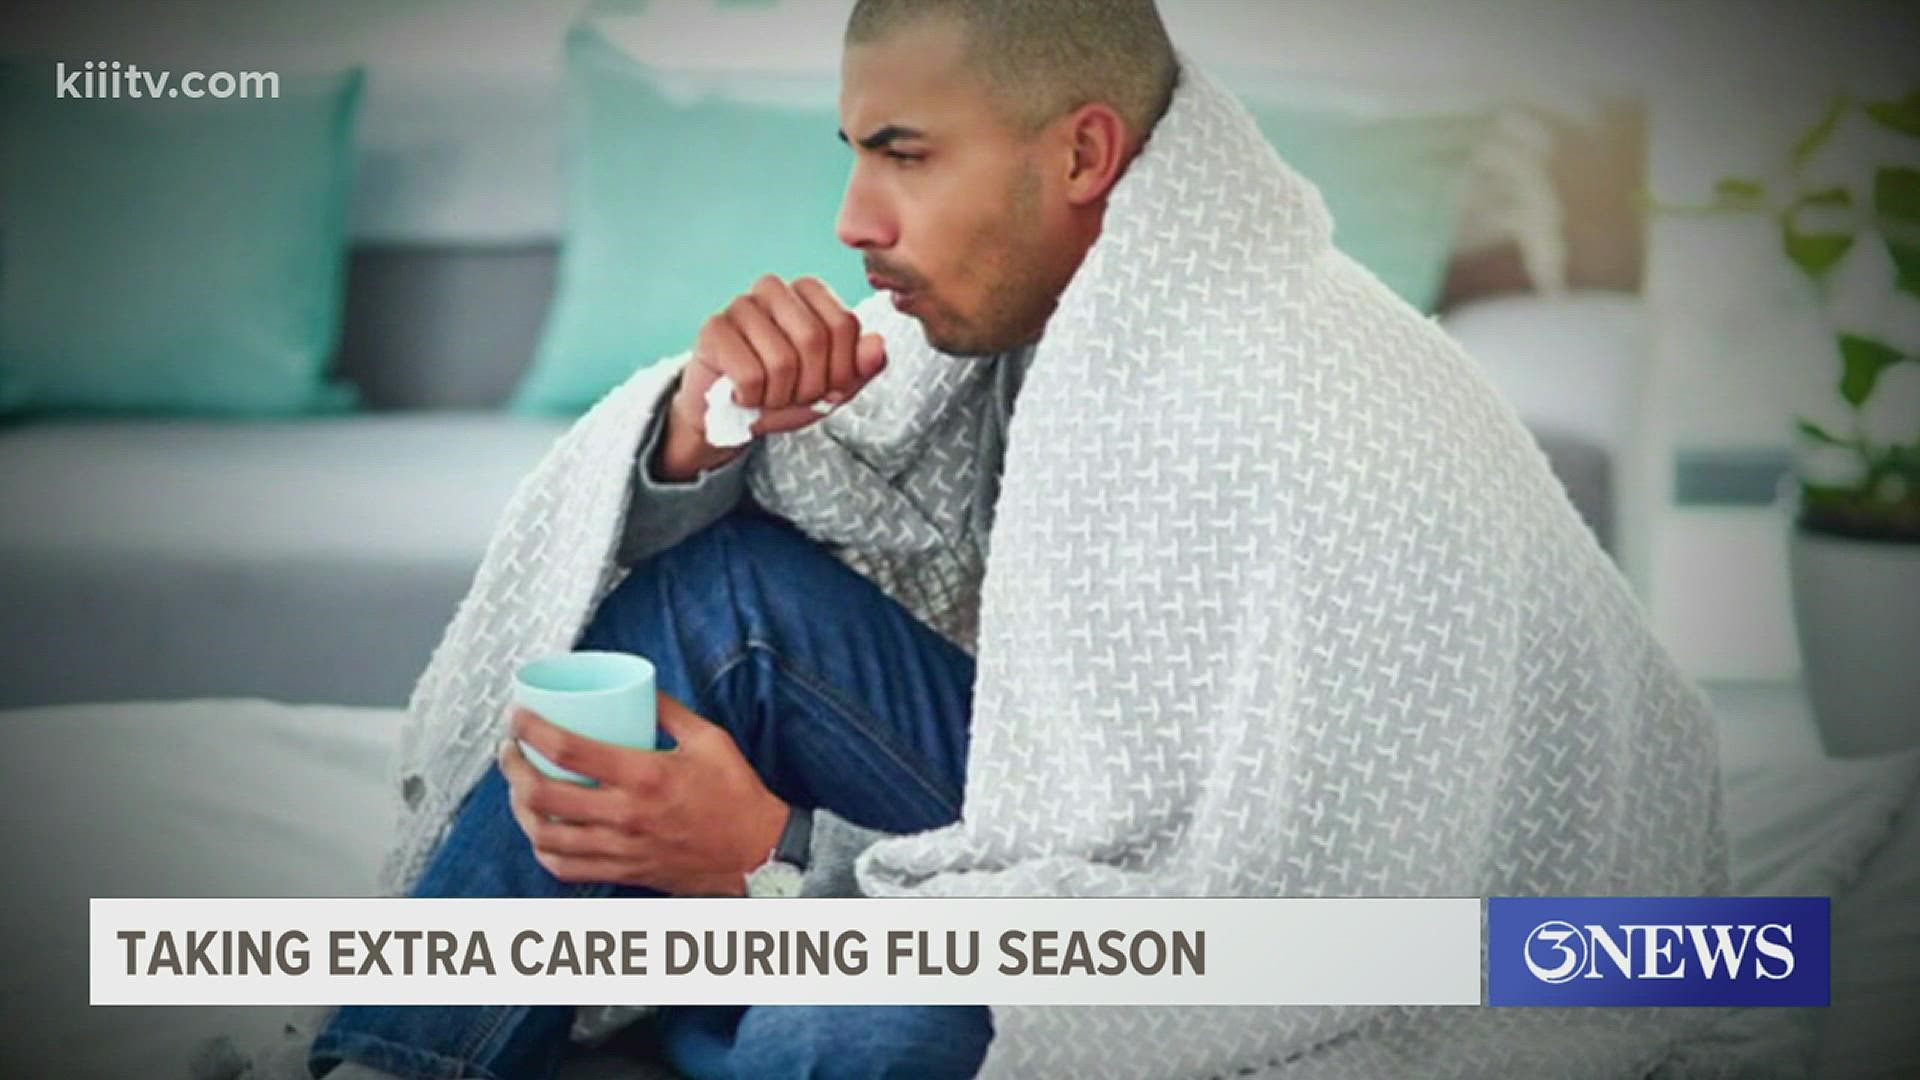 About 150 cases of the flu were reported in Nueces County, a normalcy for the time of year. However, there is an increase of reporting in other viral infections.